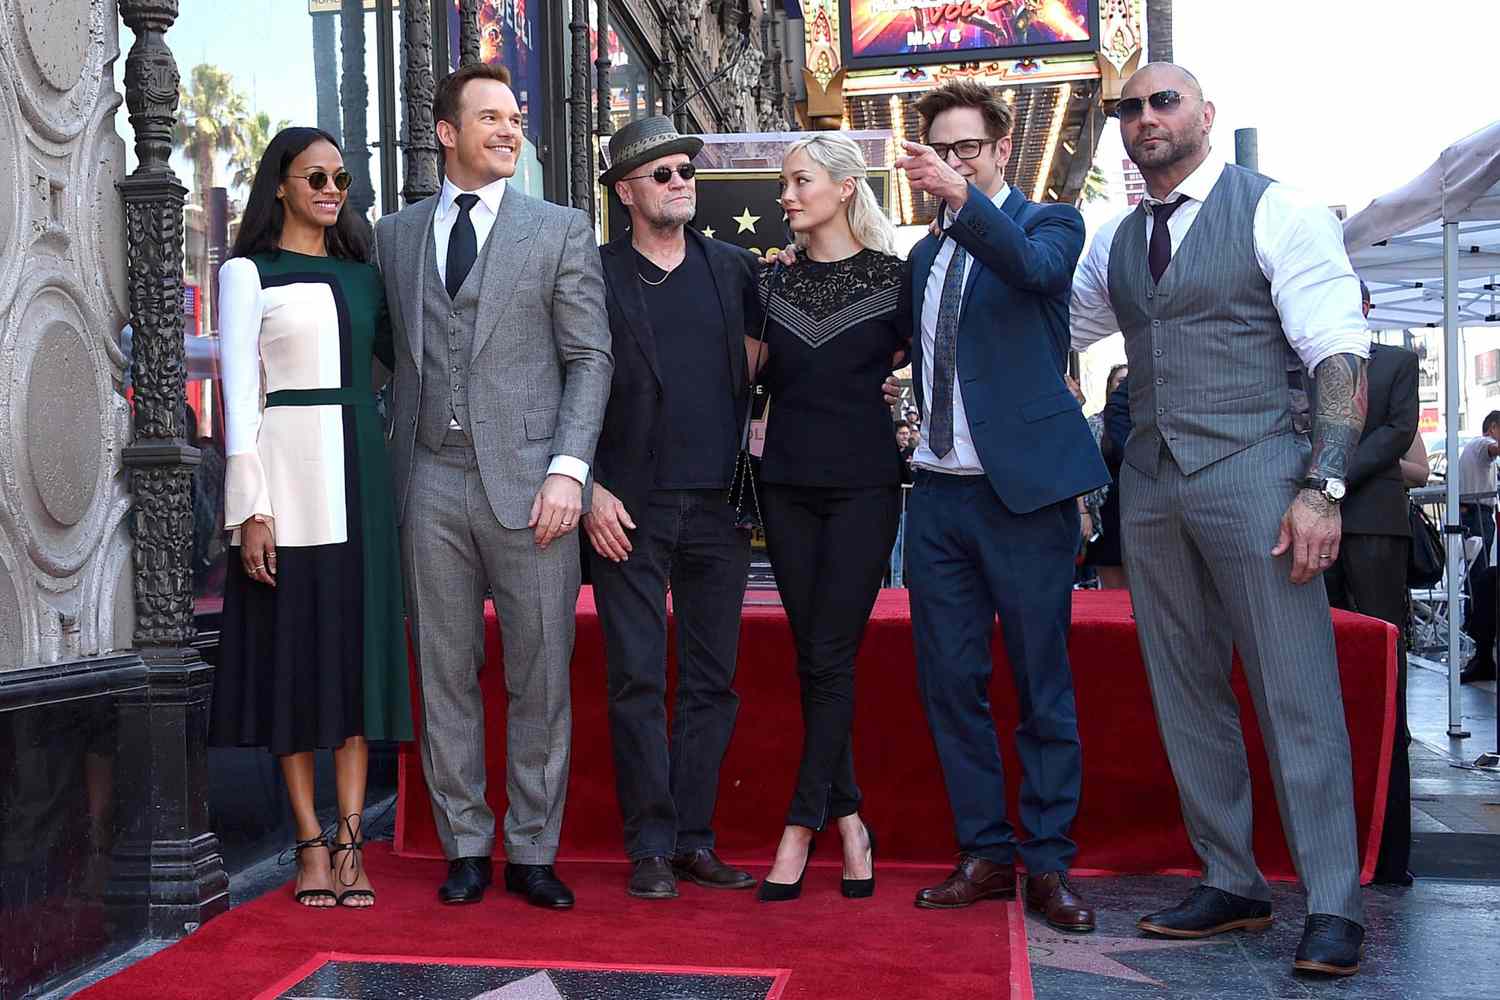 Chris Pratt Honored With Star On The Hollywood Walk Of Fame